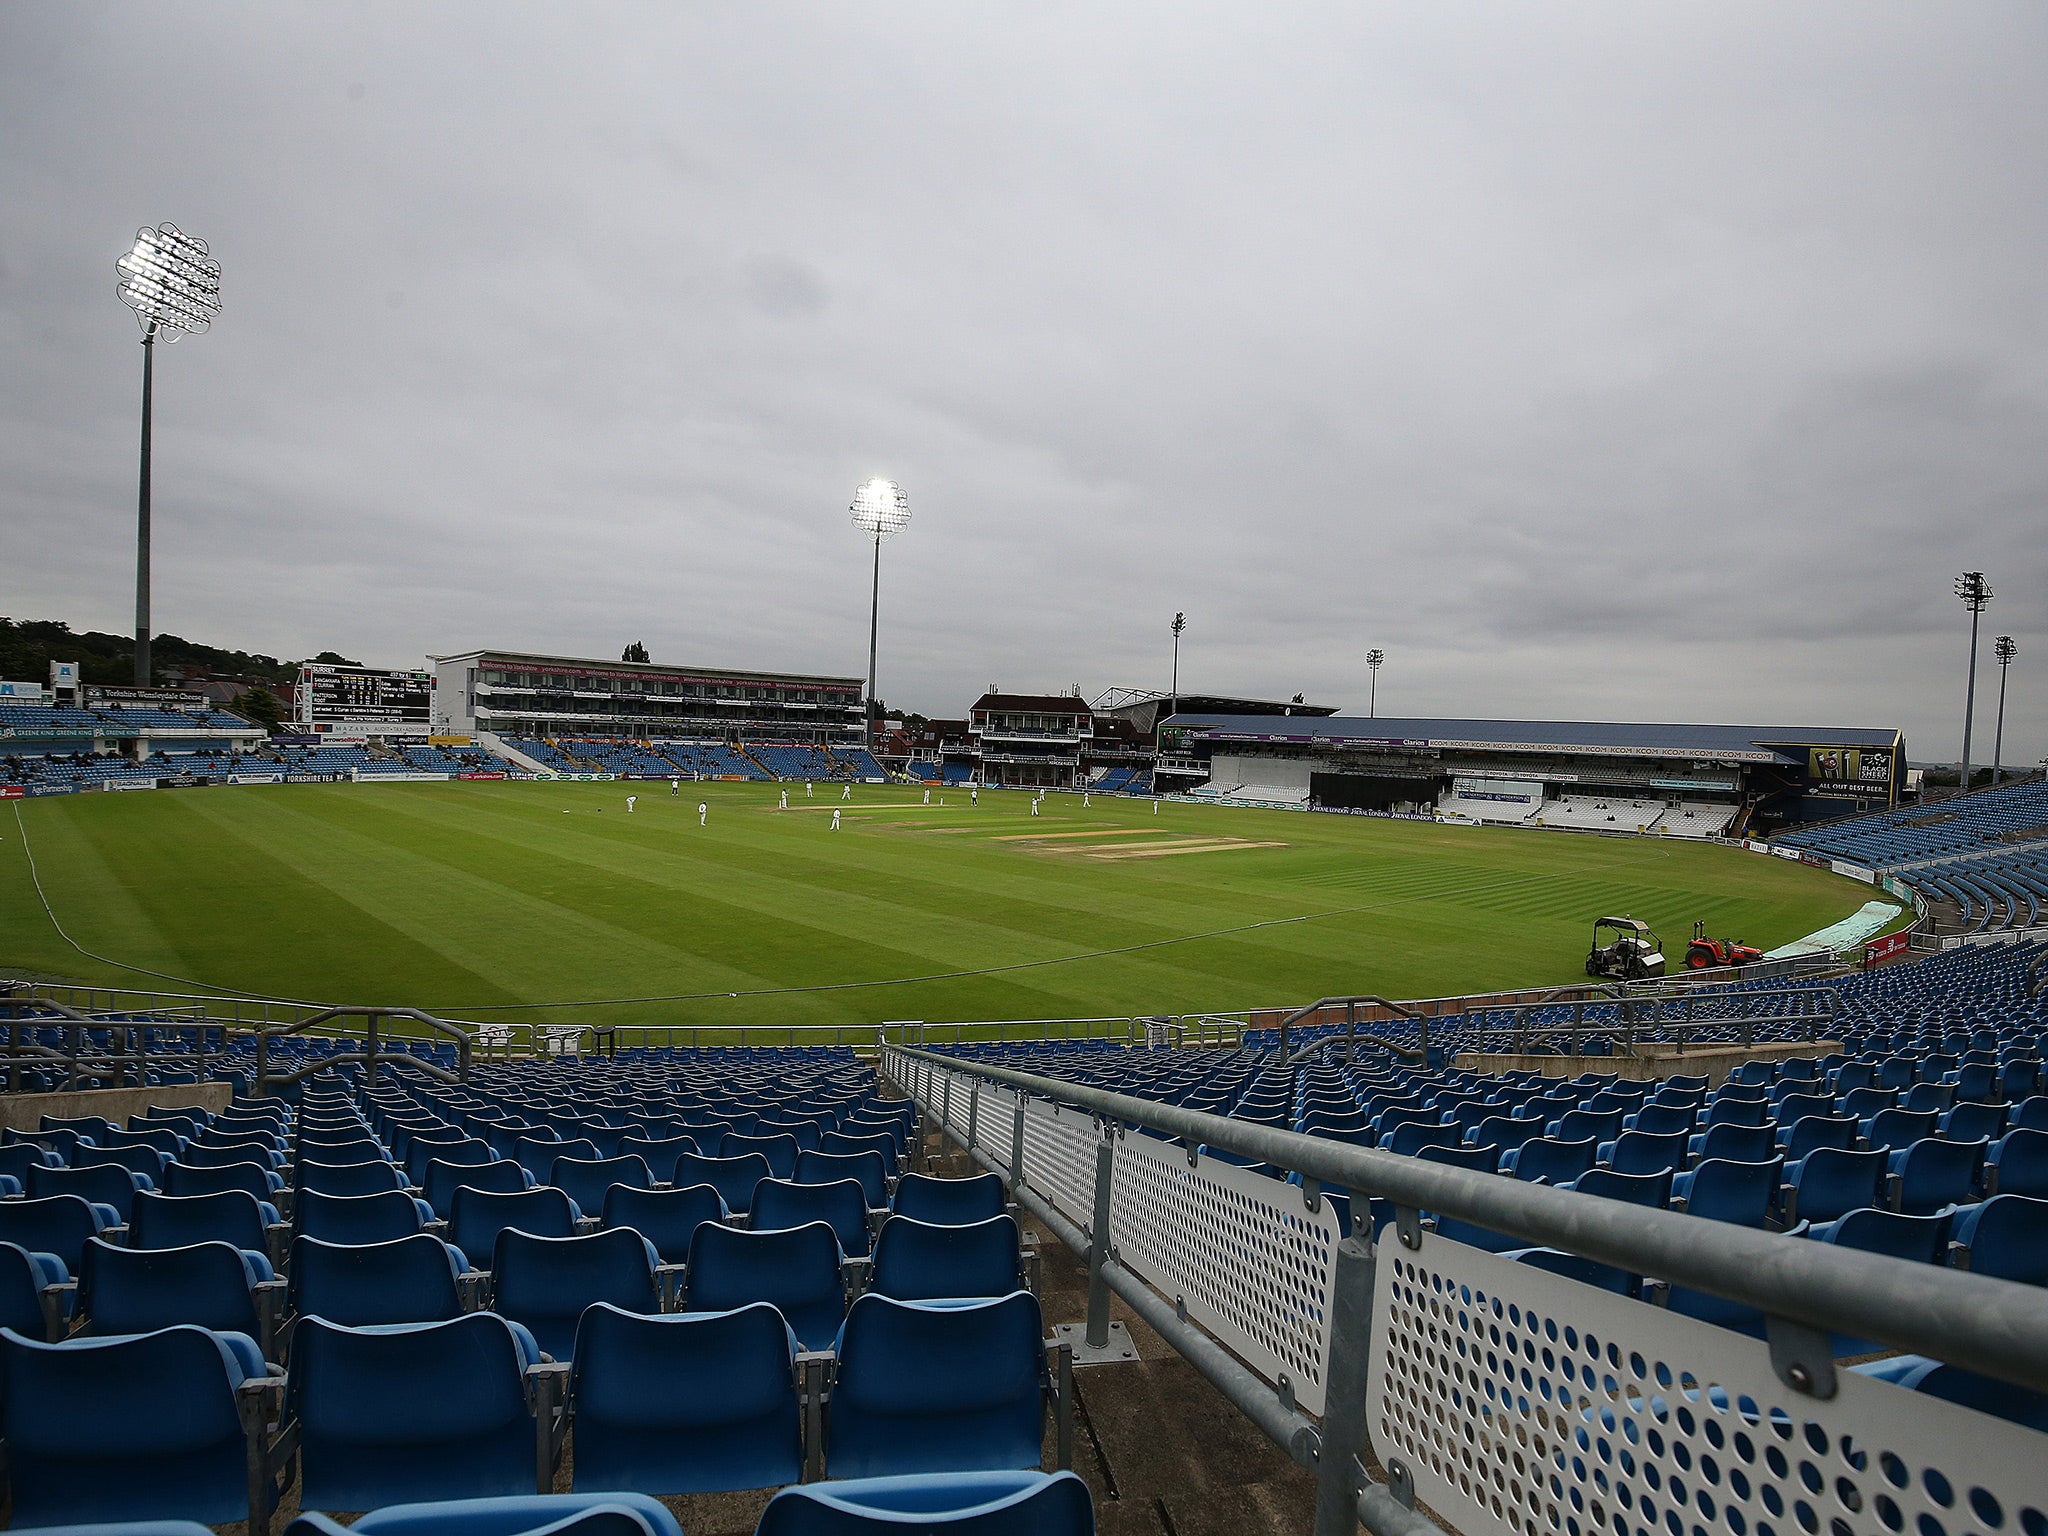 Yorkshire and Surrey's meeting was played under the lights and in front of empty seats